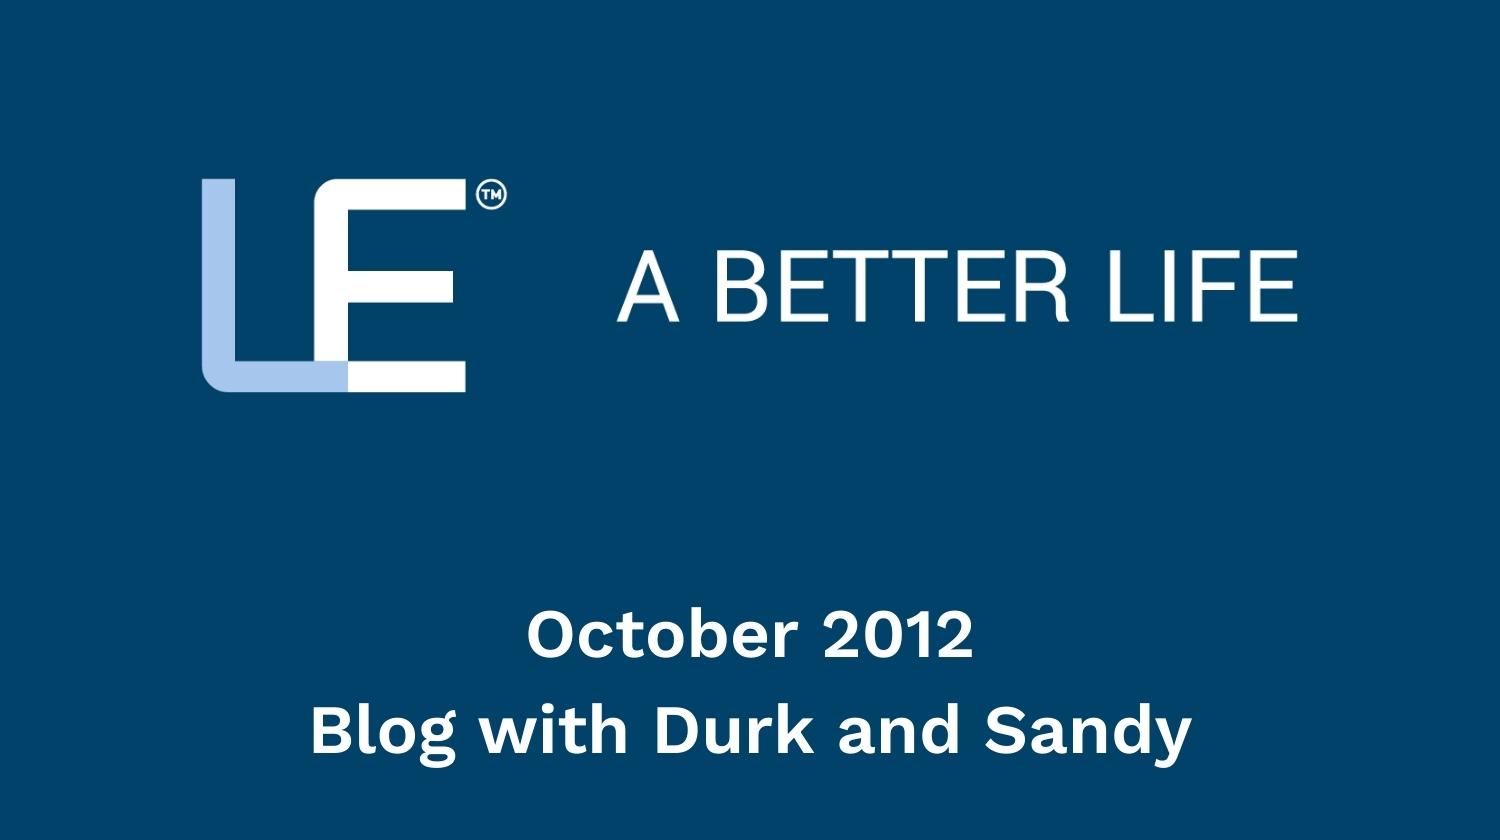 October 2012 Blog with Durk and Sandy